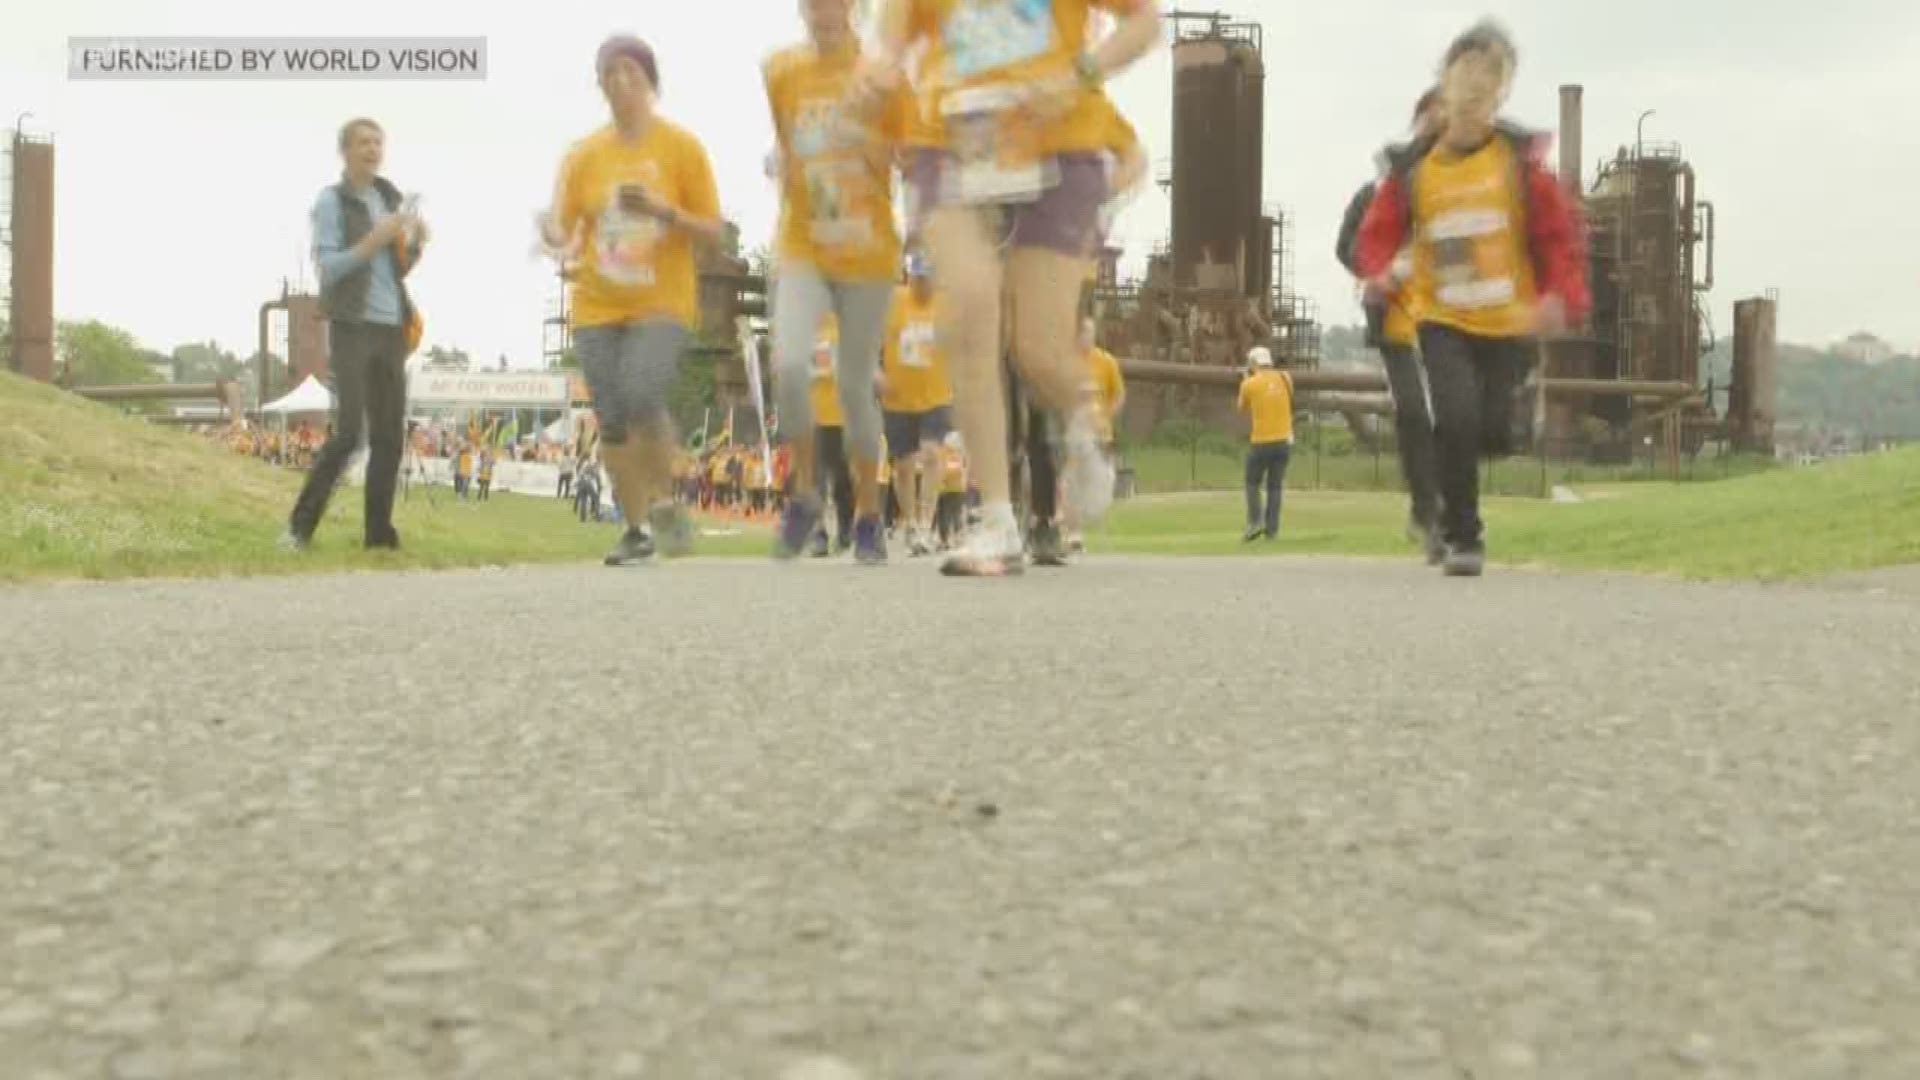 At least 1,000 participants from the Twin Cities will join thousands of runners and walkers in more than 20 countries this Saturday to bring clean water to 60,000 children and their families in developing countries.